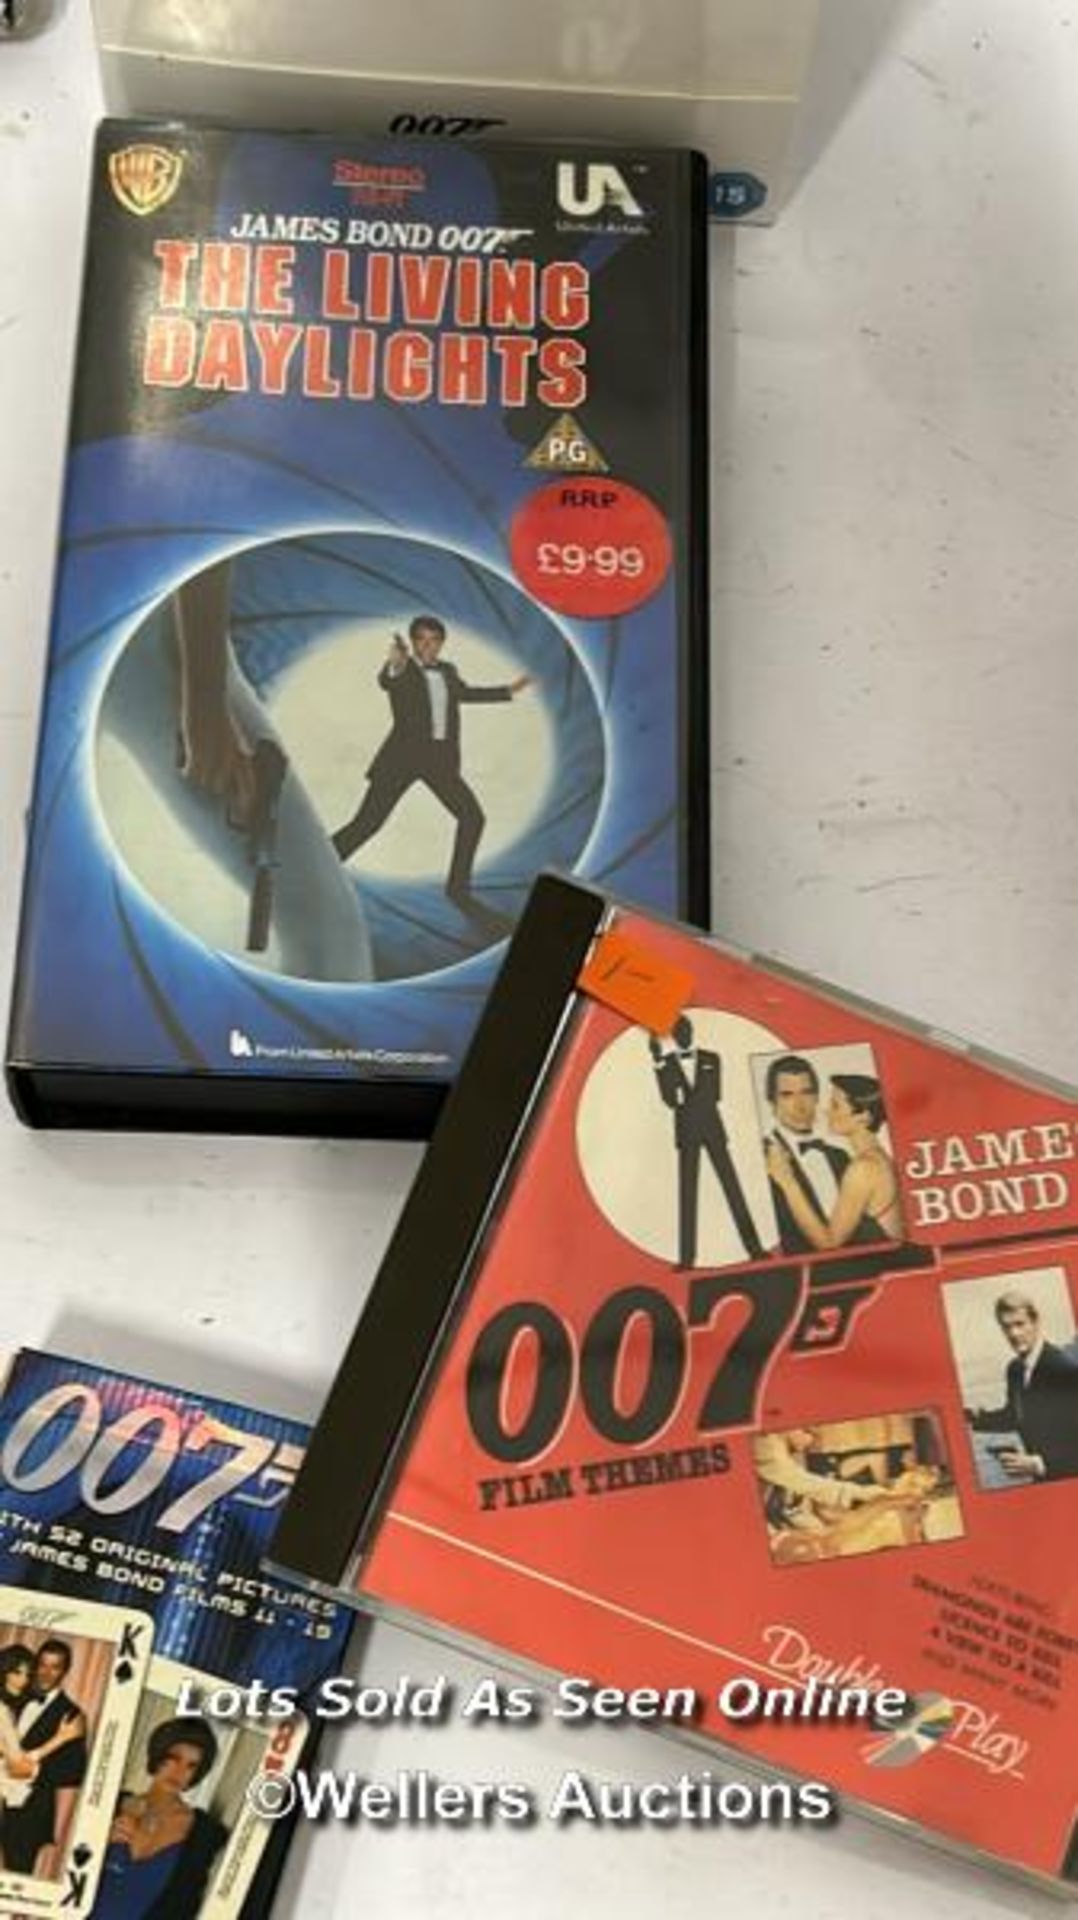 James Bond - Collectors cards, magazines, playing cards and sealed DVD box set / AN8 - Image 6 of 8